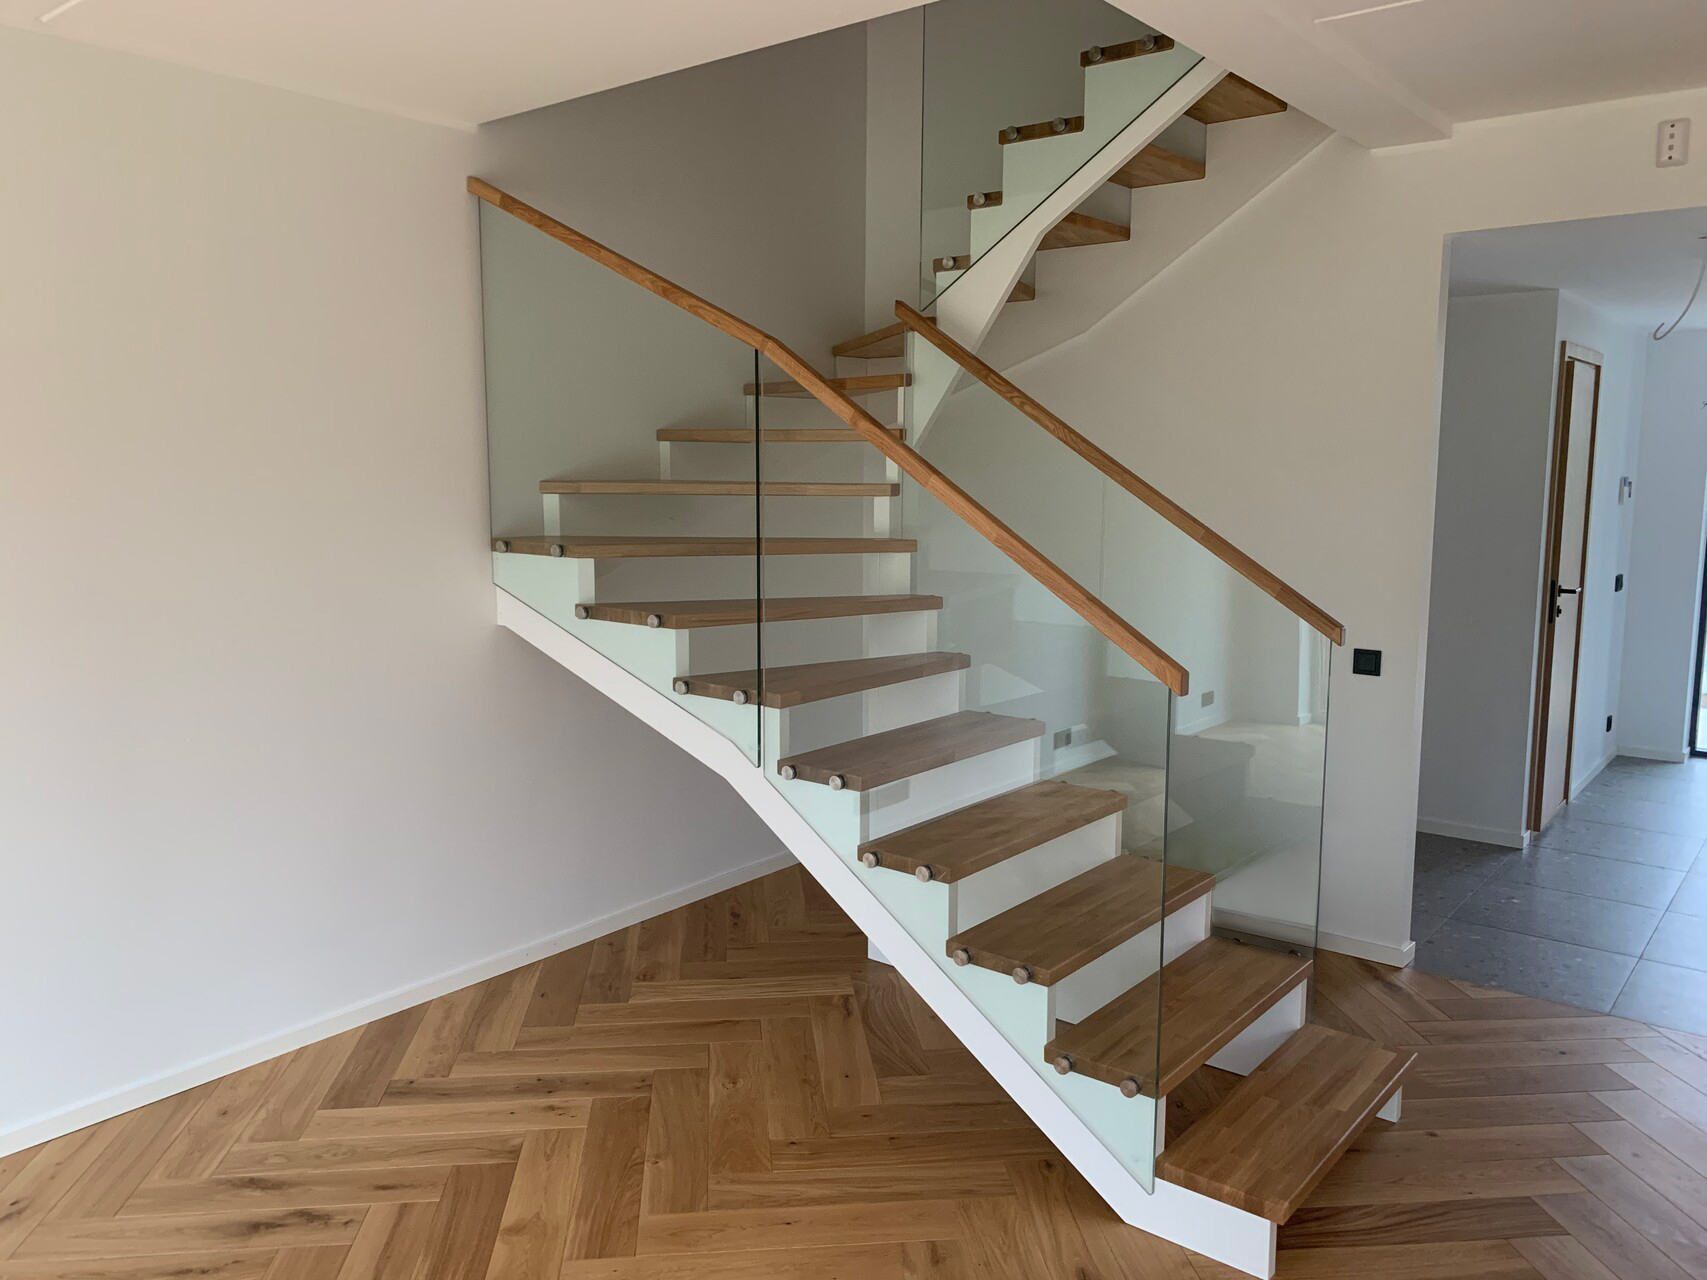 16. A modern U-shaped staircase with a stringer board and a glass railing